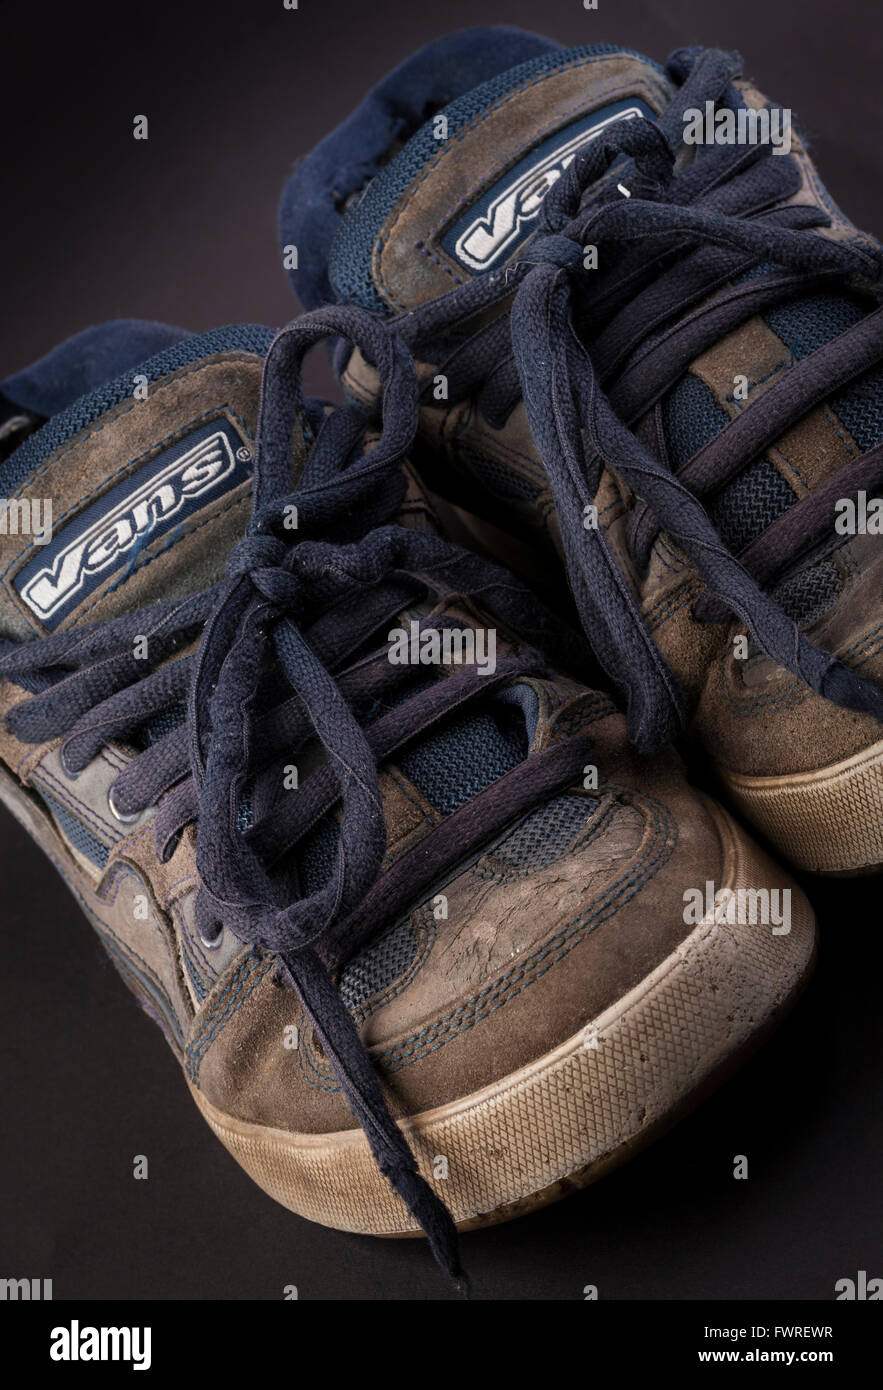 Old Friends - trusty Vans trainers get retired gracefully Stock Photo -  Alamy